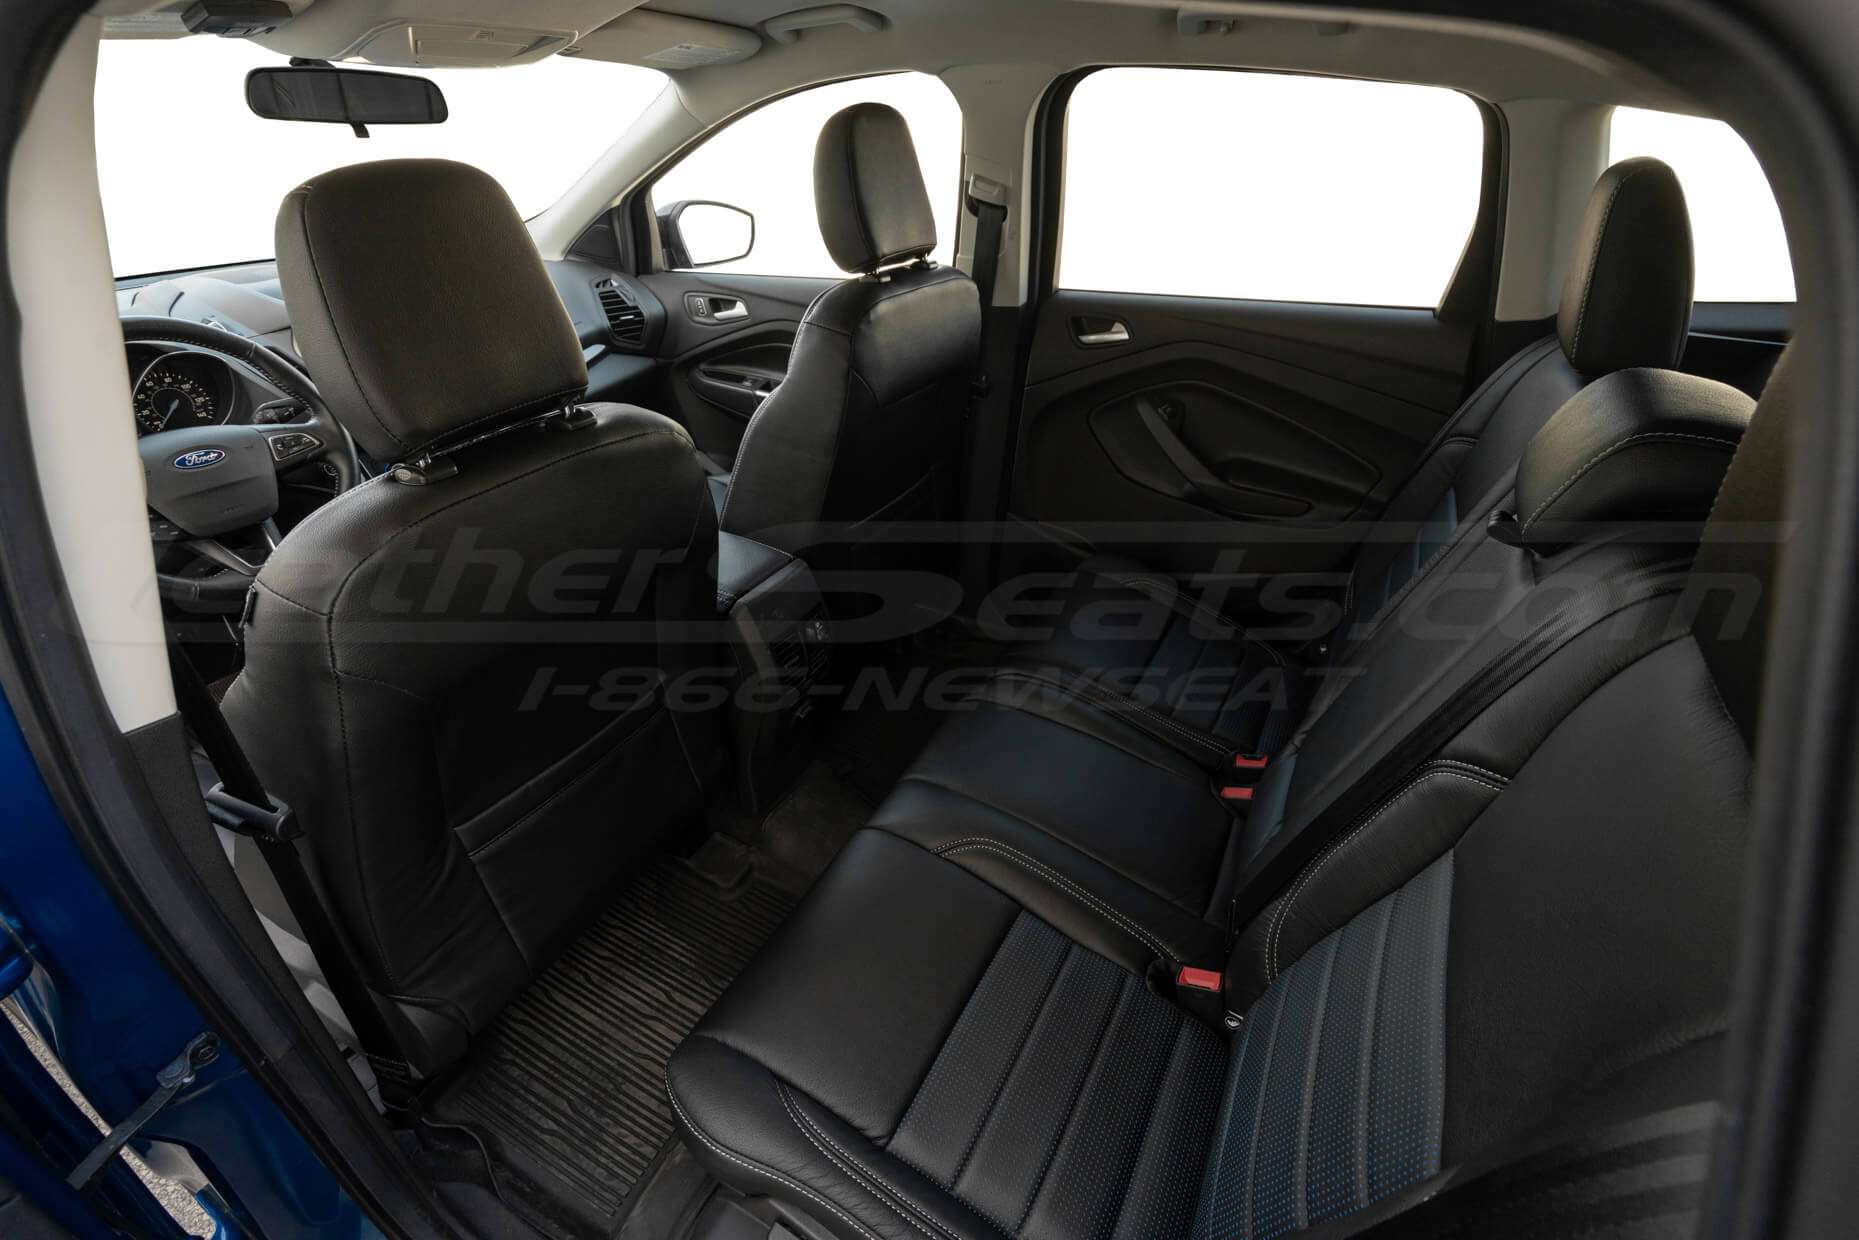 Back view of front seat upholstery